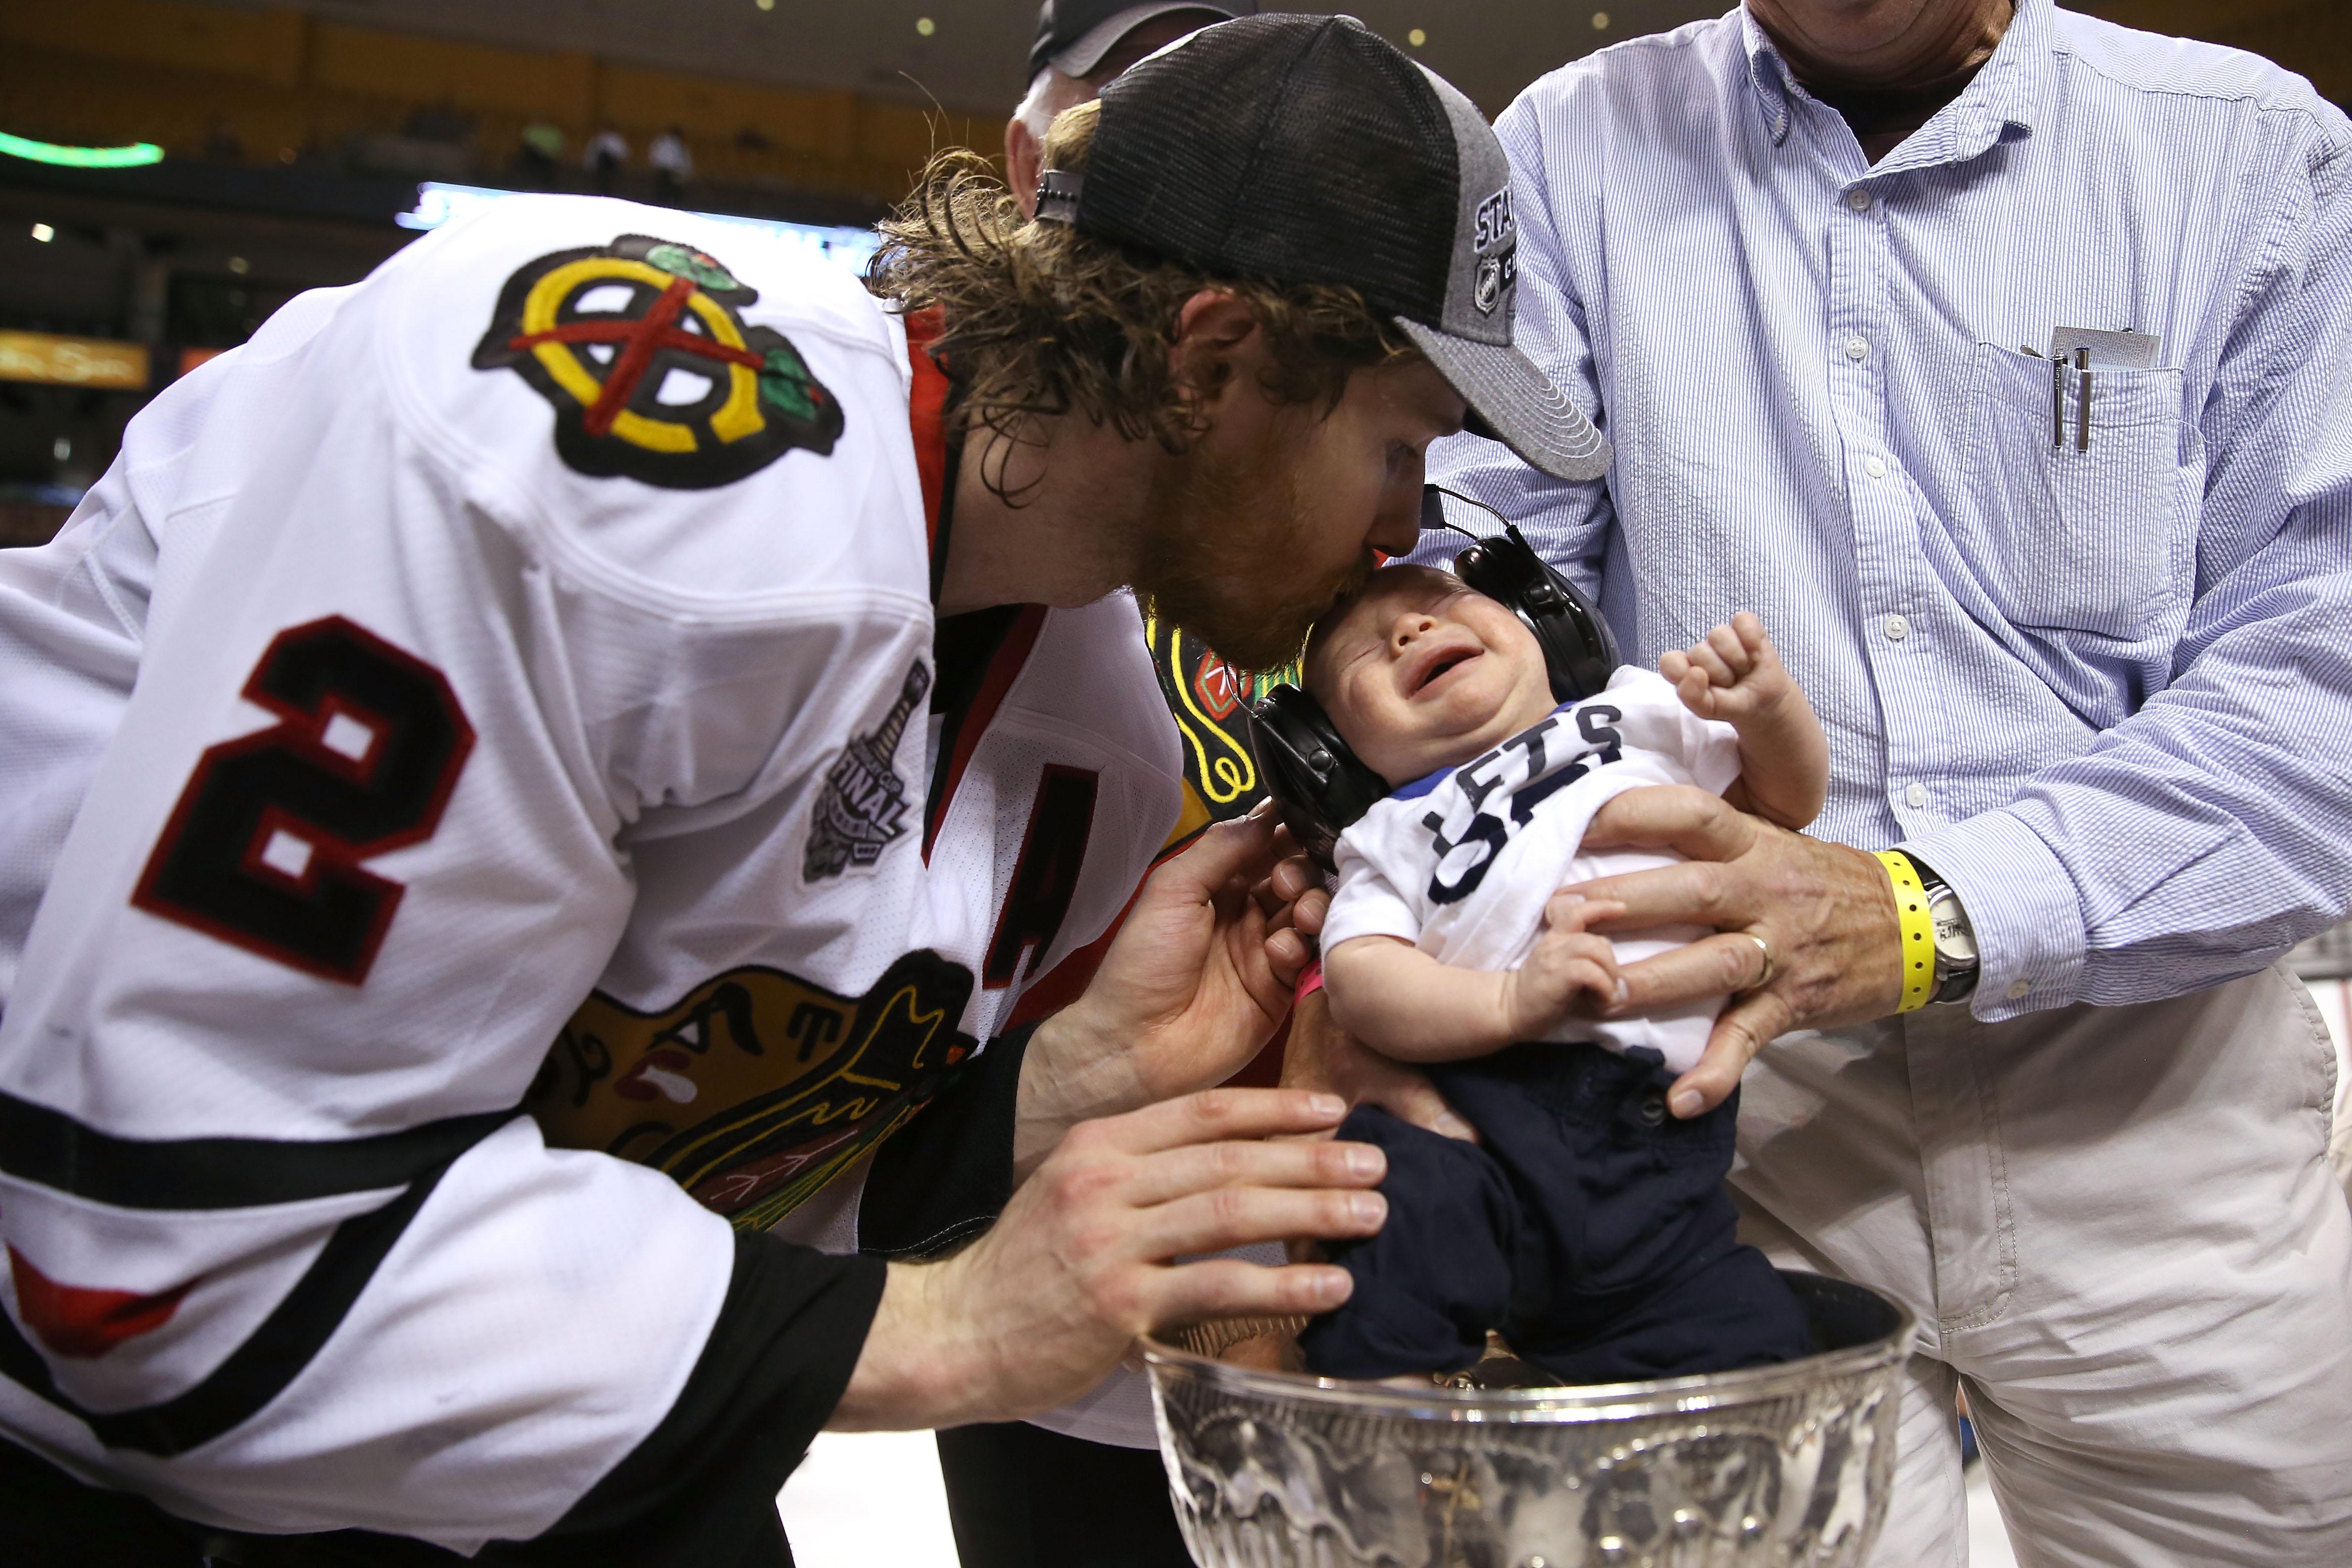 BOSTON, MA - JUNE 24:  Duncan Keith #2 of the Chicago Blackhawks celebrates a 2-1 victory over the Boston Bruins with his son following Game Six of the 2013 NHL Stanley Cup Final at TD Garden on June 24, 2013 in Boston, Massachusetts.  (Photo by Bruce Bennett/Getty Images)